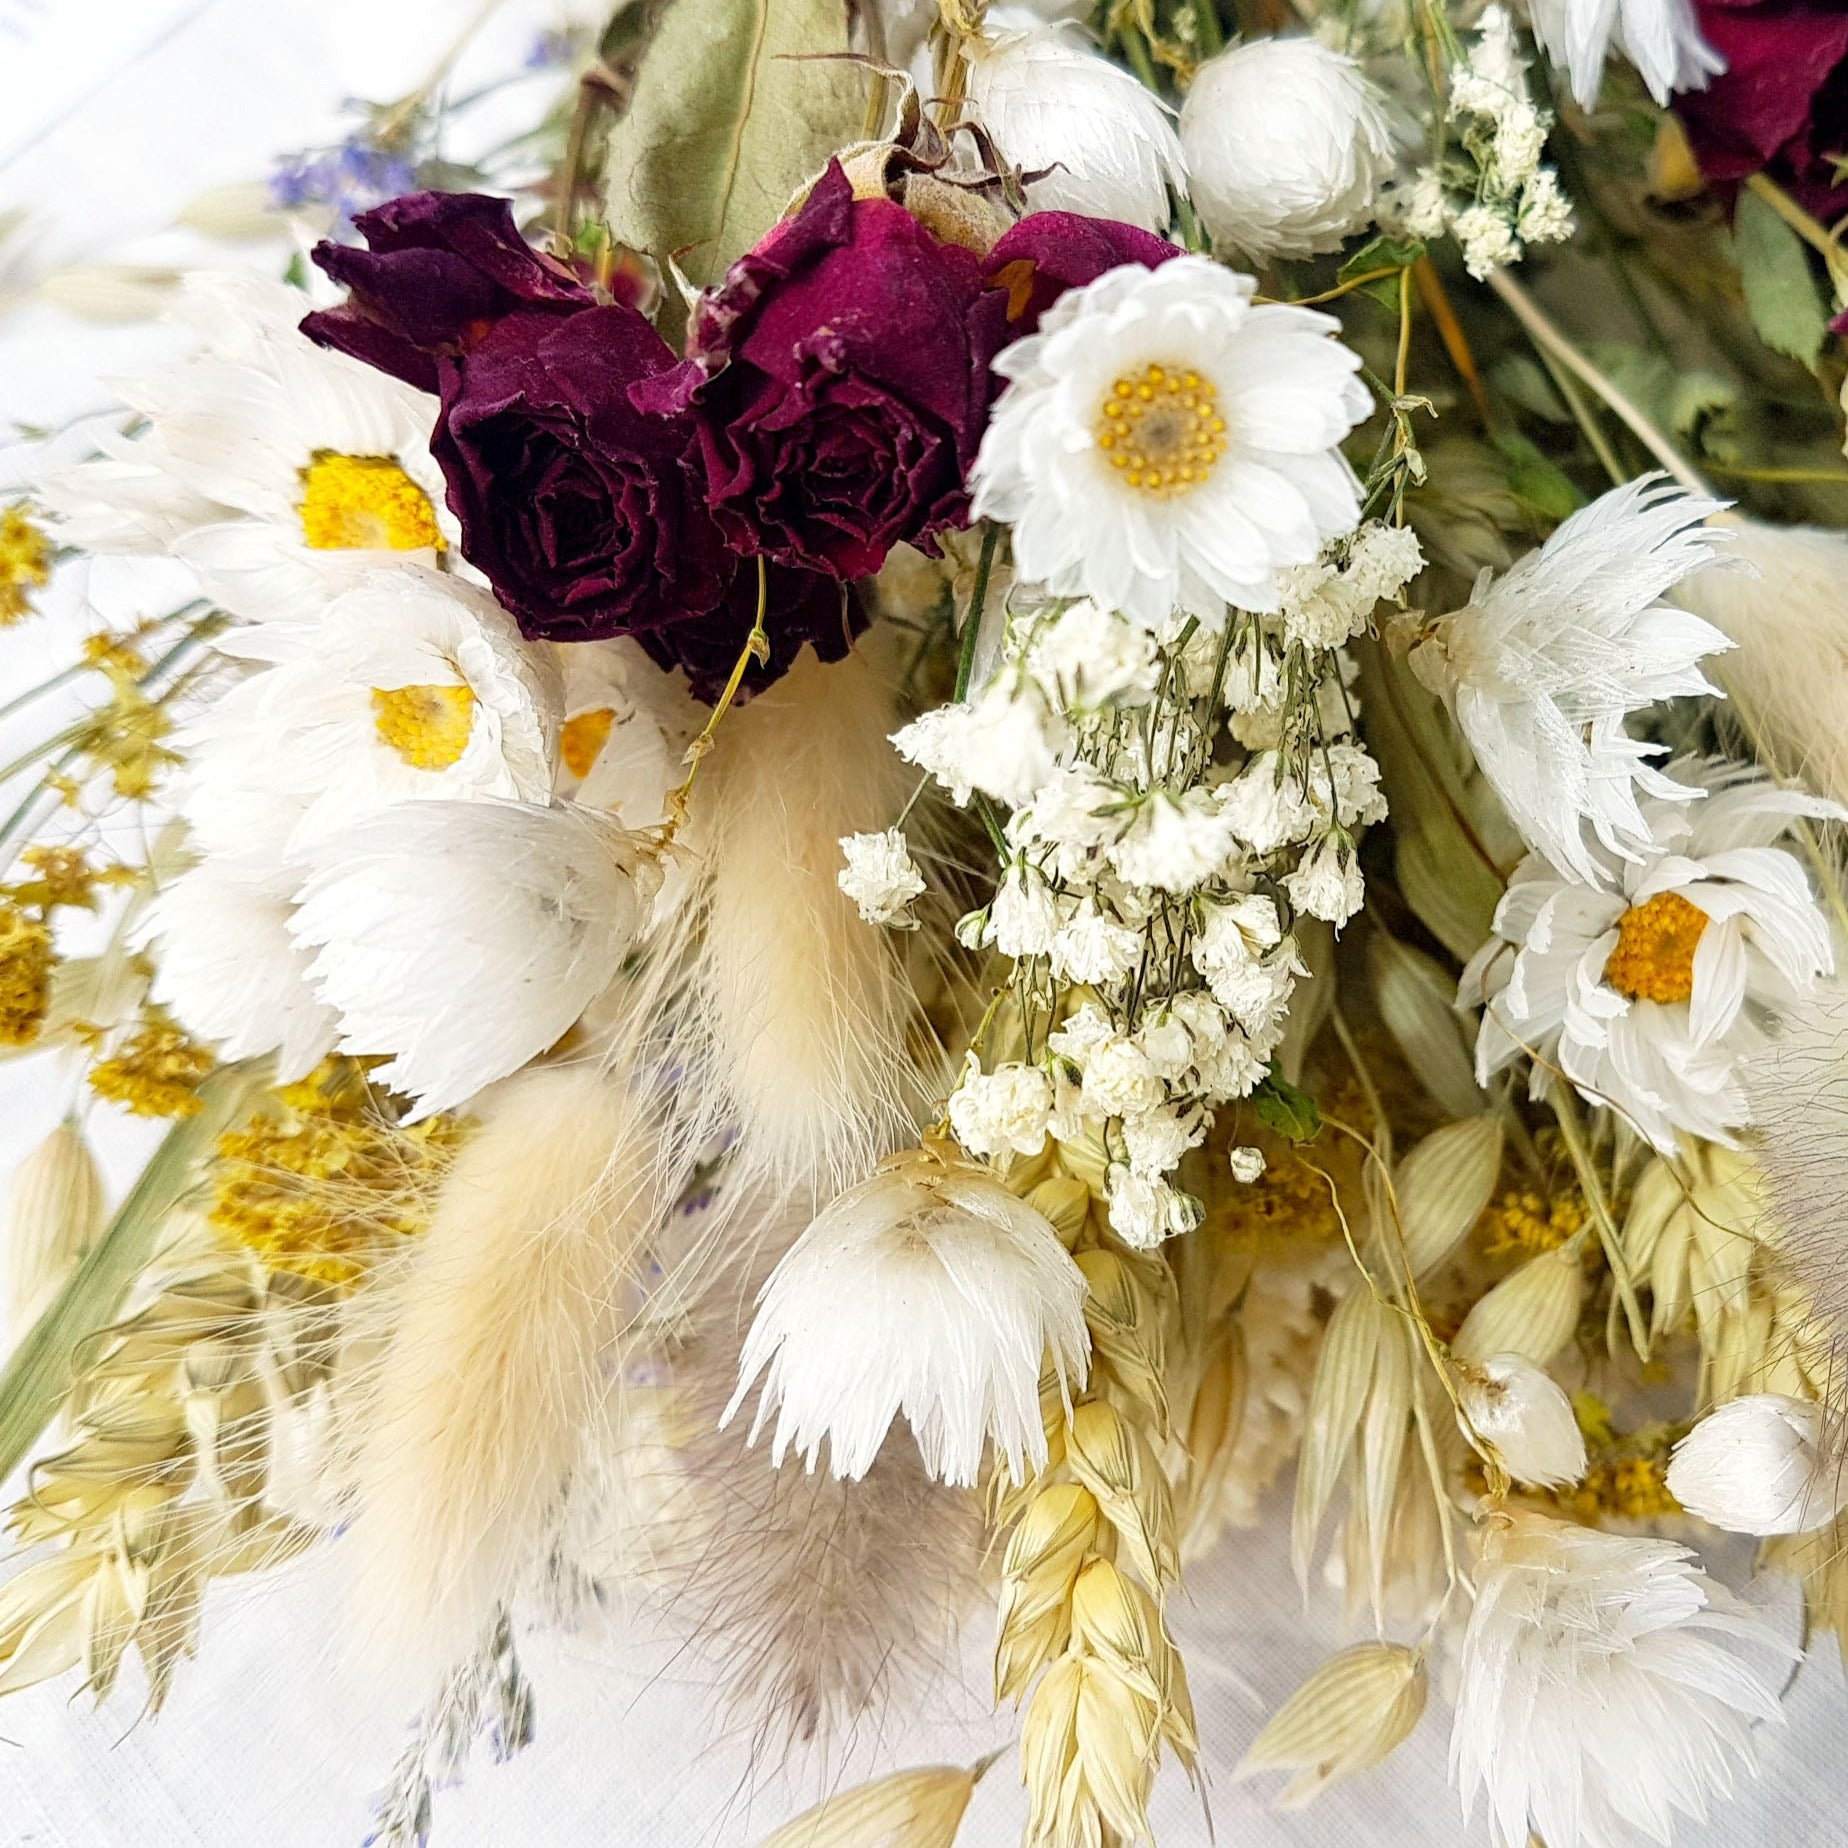 A close up of the dried flower bouquet. You can see in detail the red spray roses, crisp white daisies with yellow centres, purple blue toned sea lavender and frothy white gypsophila among other grasses and fillers. 